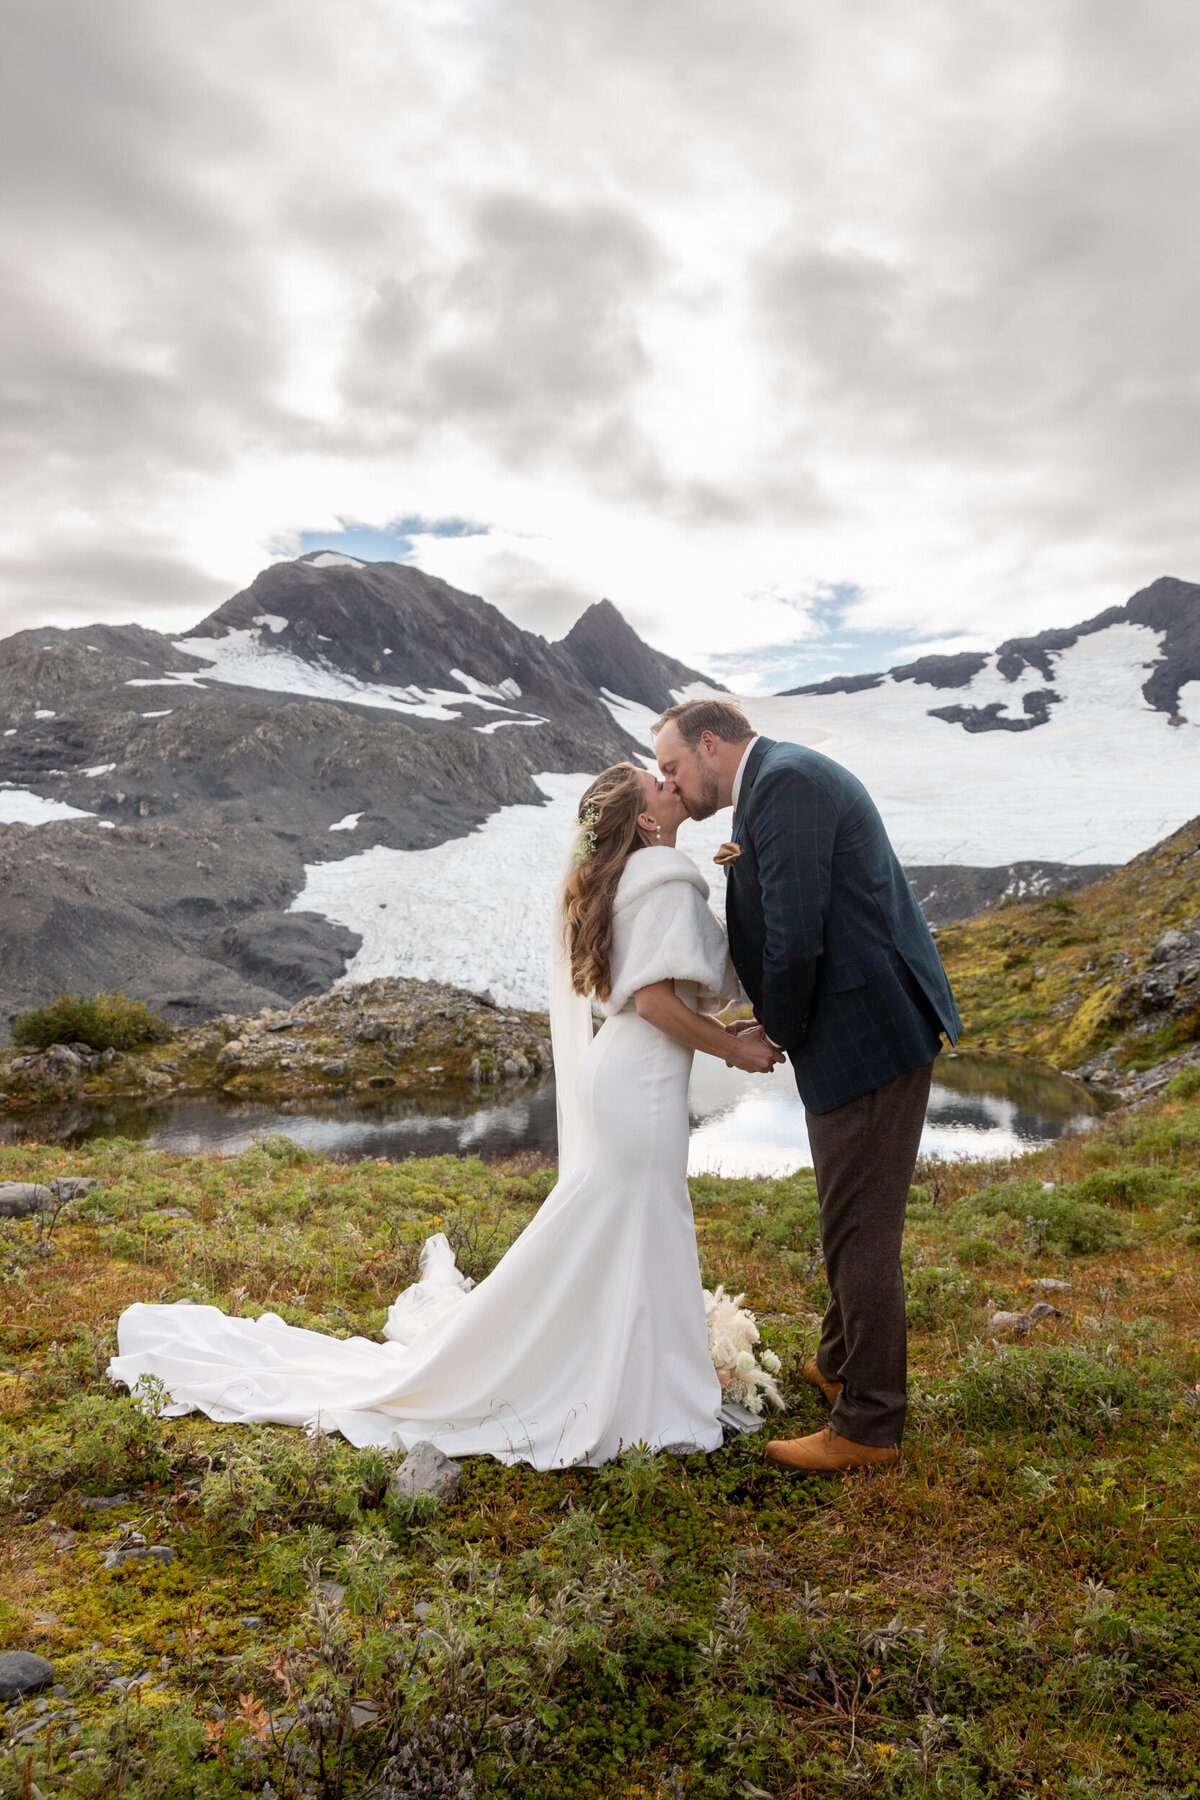 A bride and groom share their first kiss after their Alaska elopement ceremony.